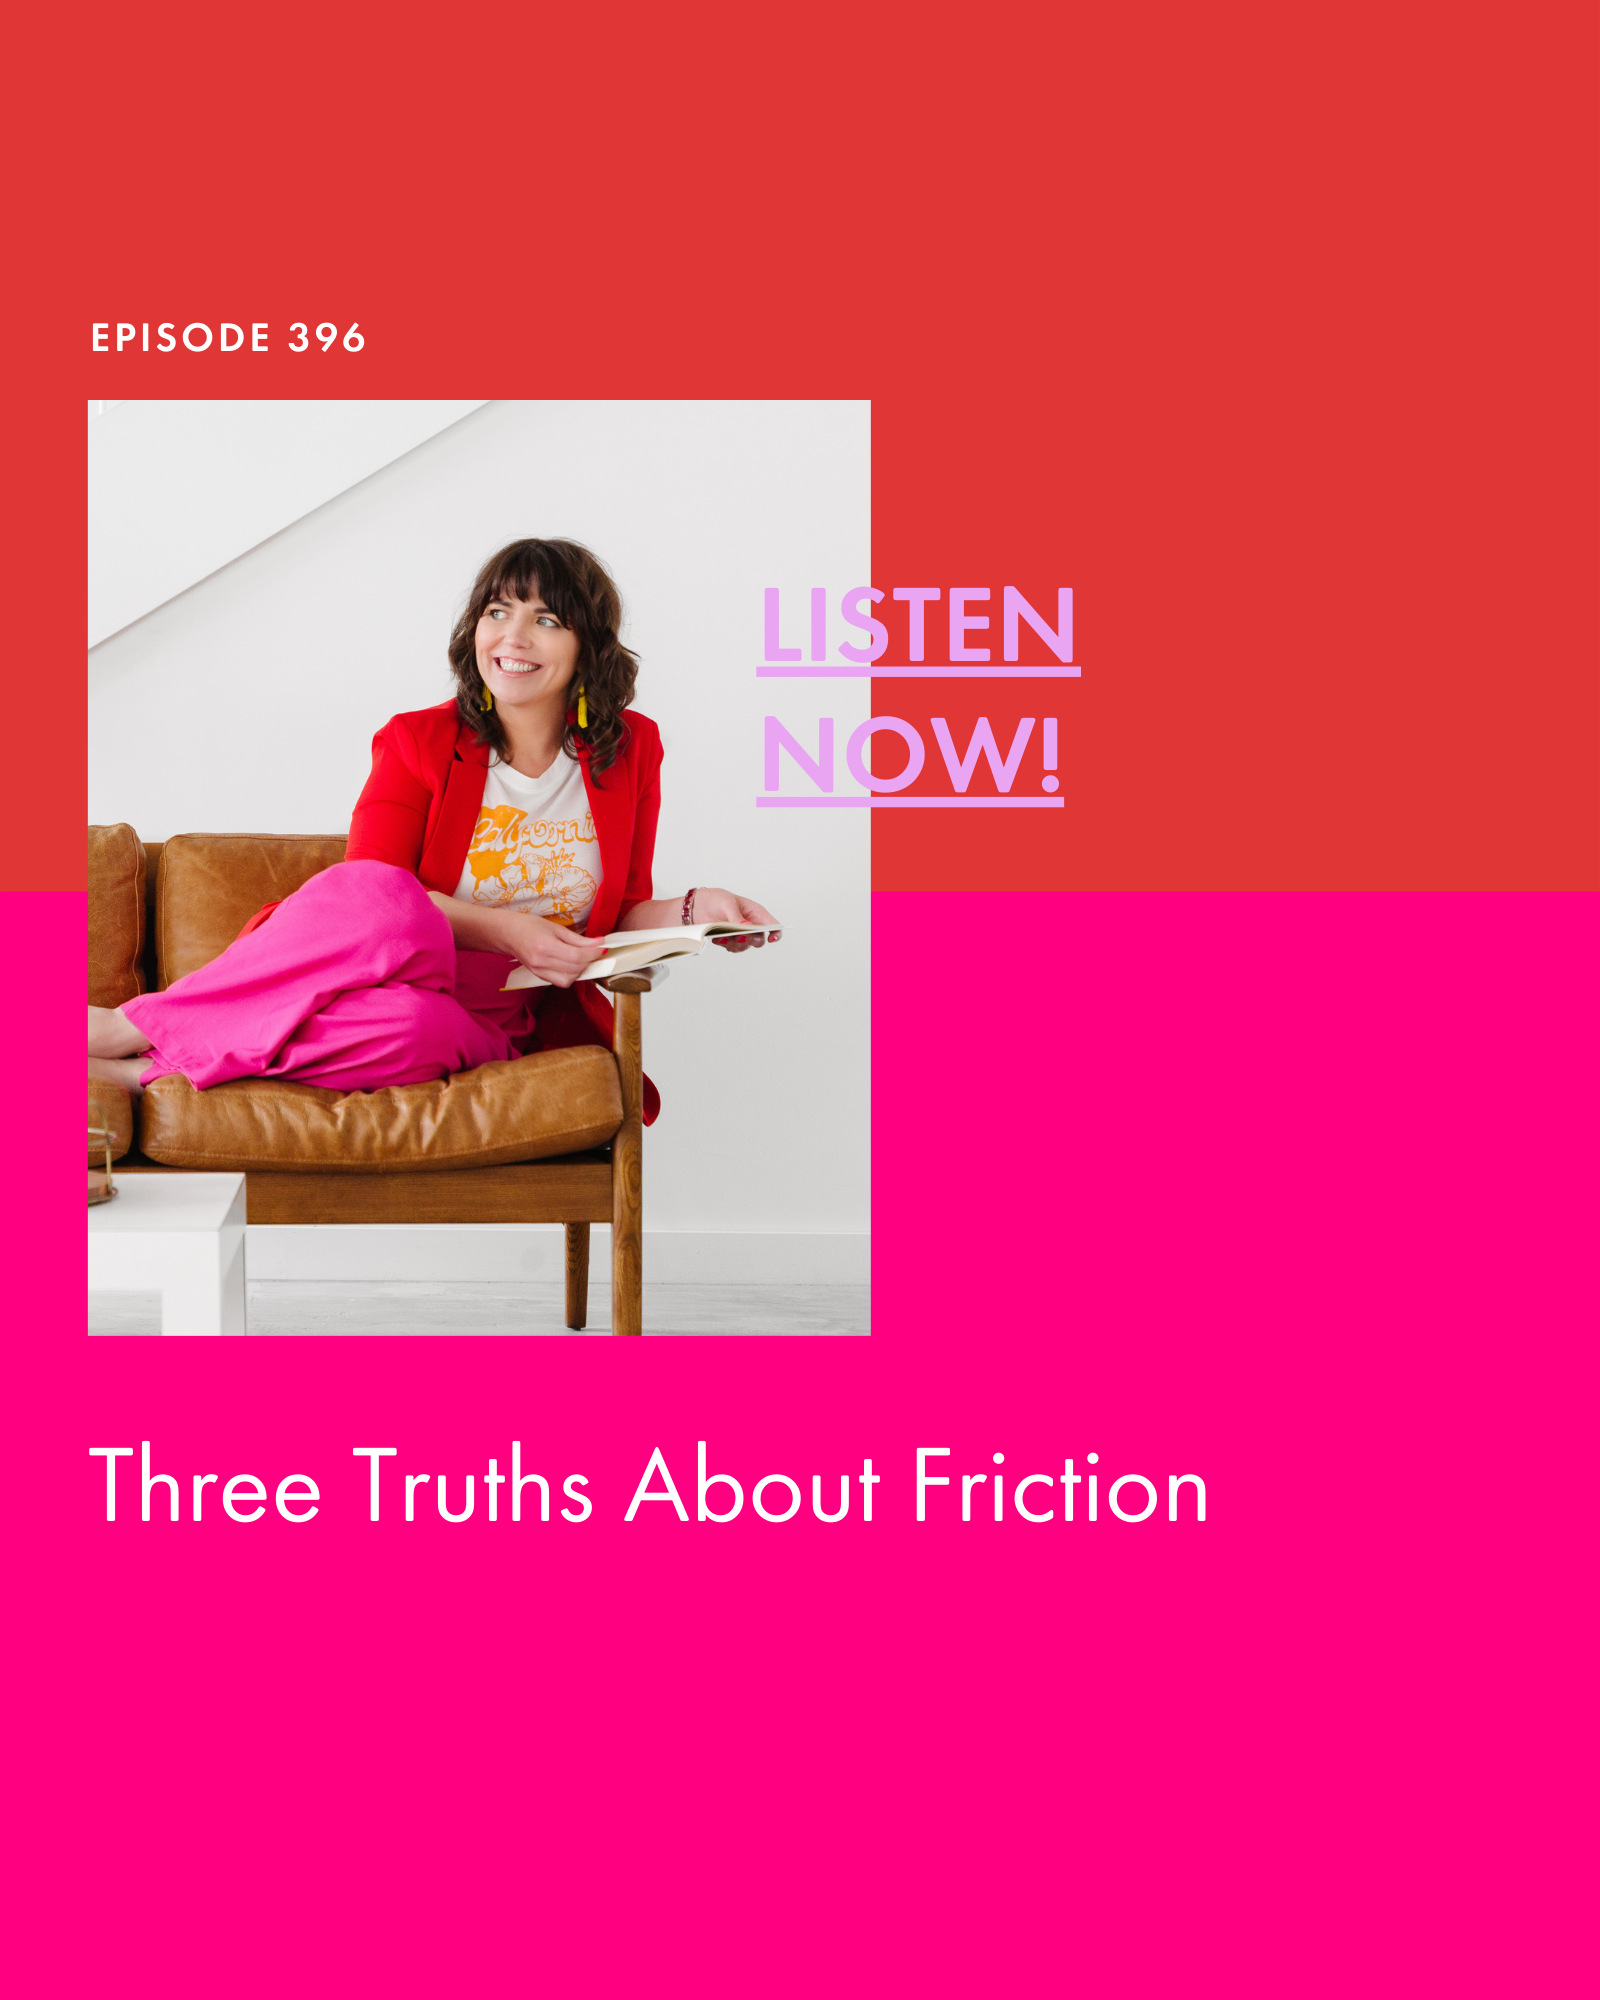 Three Truths About Friction